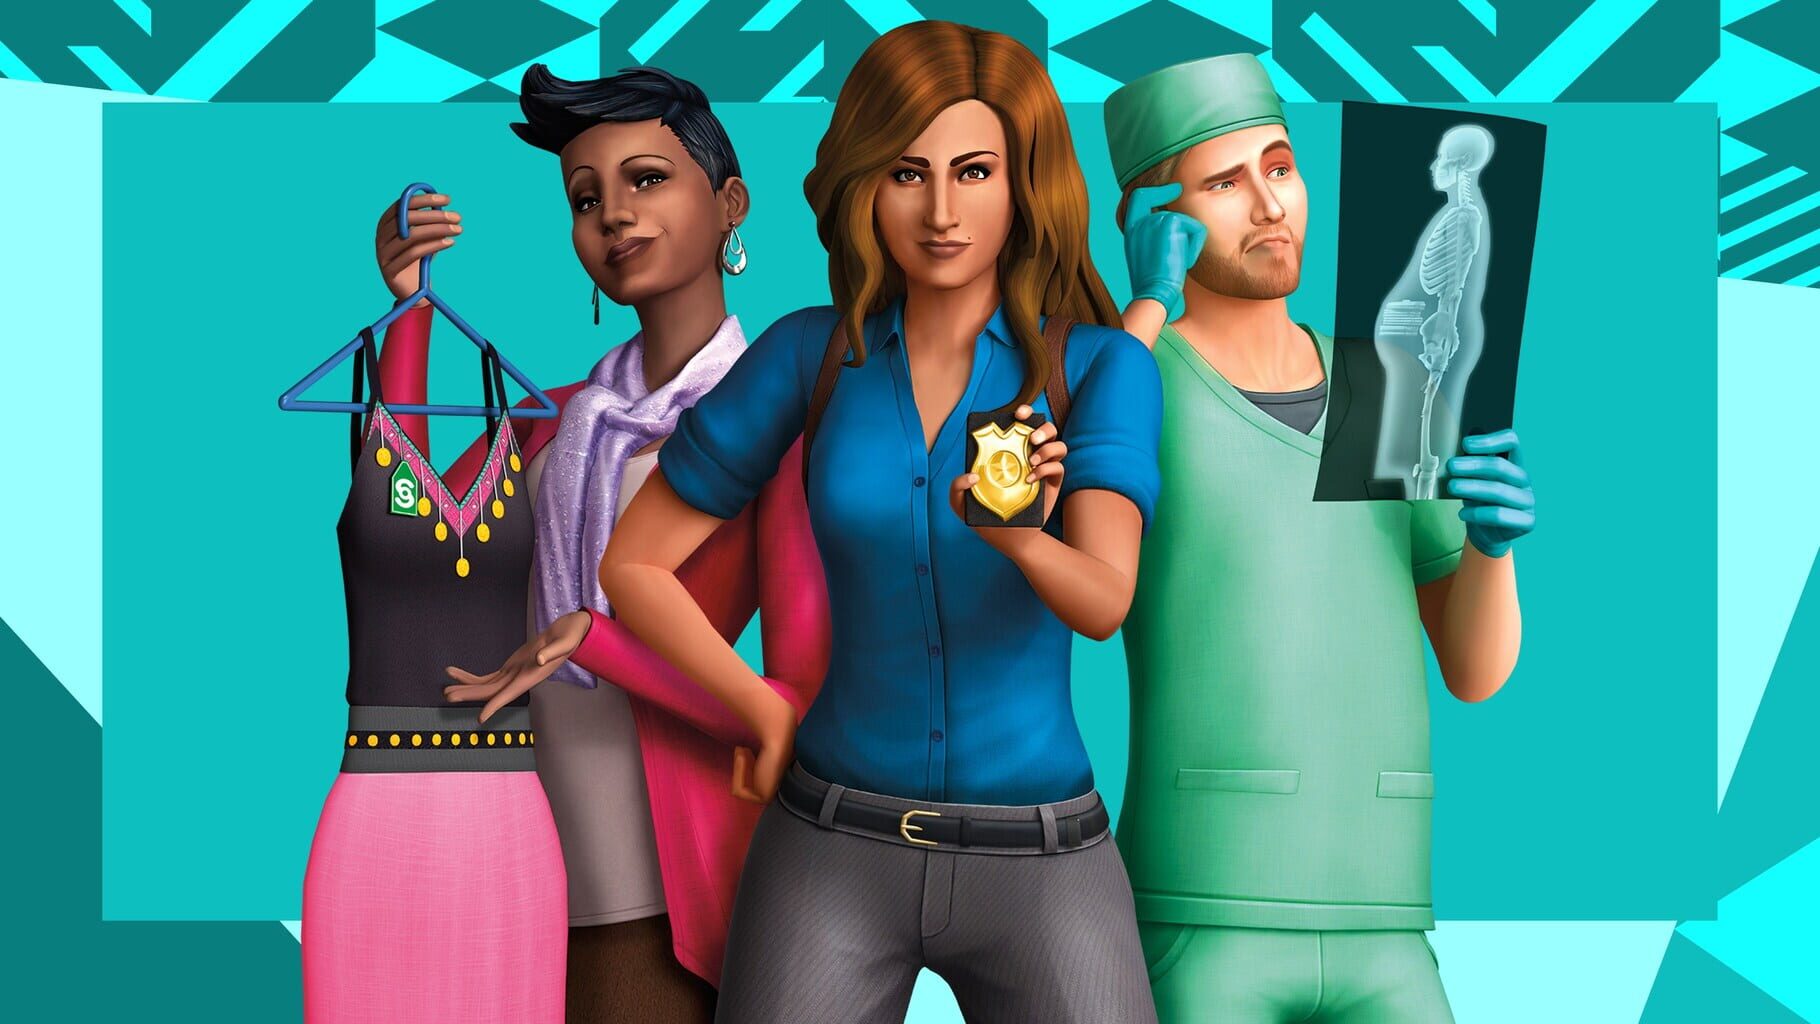 The Sims 4: Get to Work Image